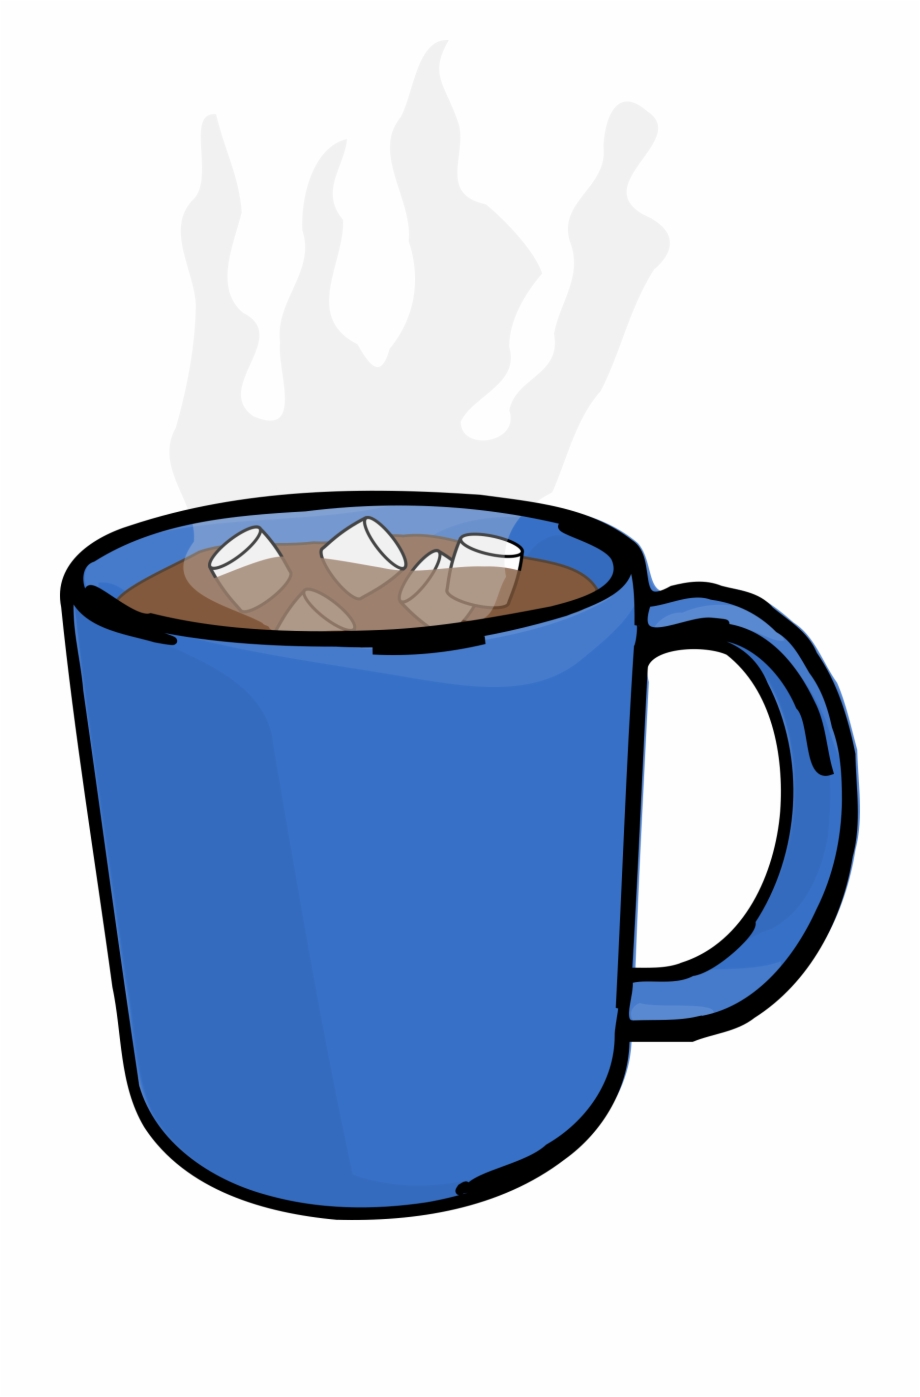 cups clipart cup hot chocolate